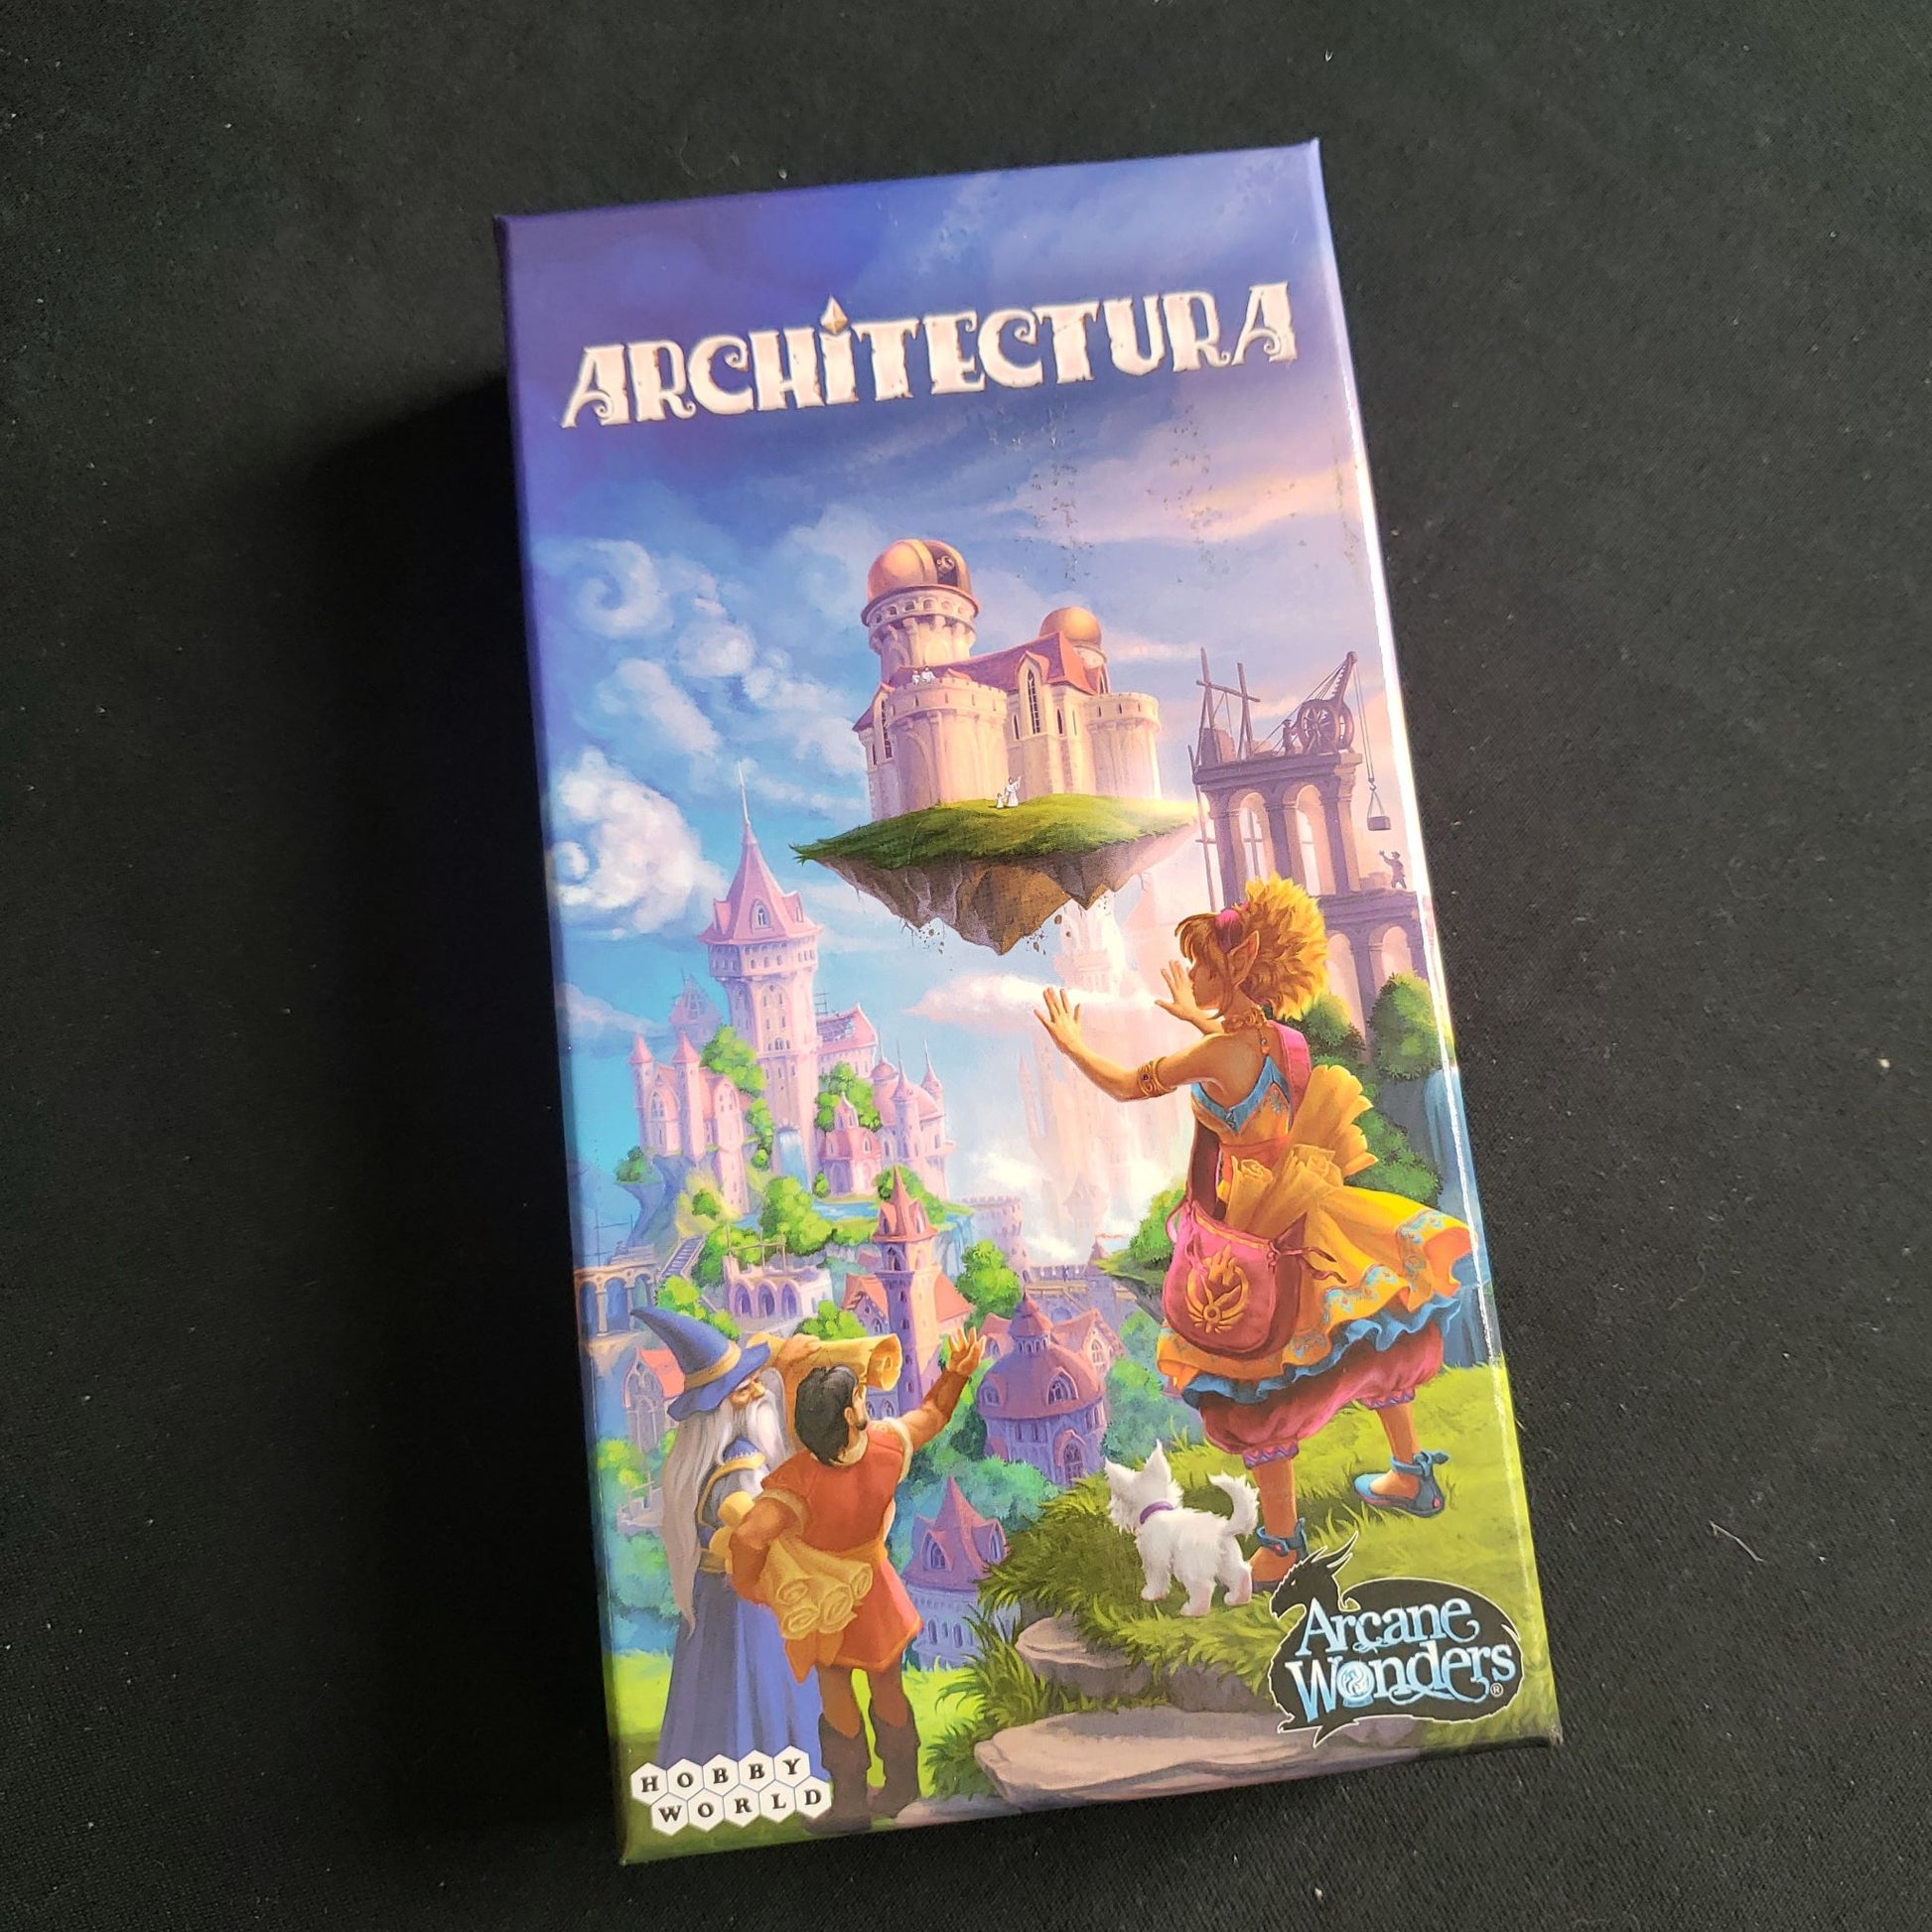 Image shows the front cover of the box of the Architectura card game